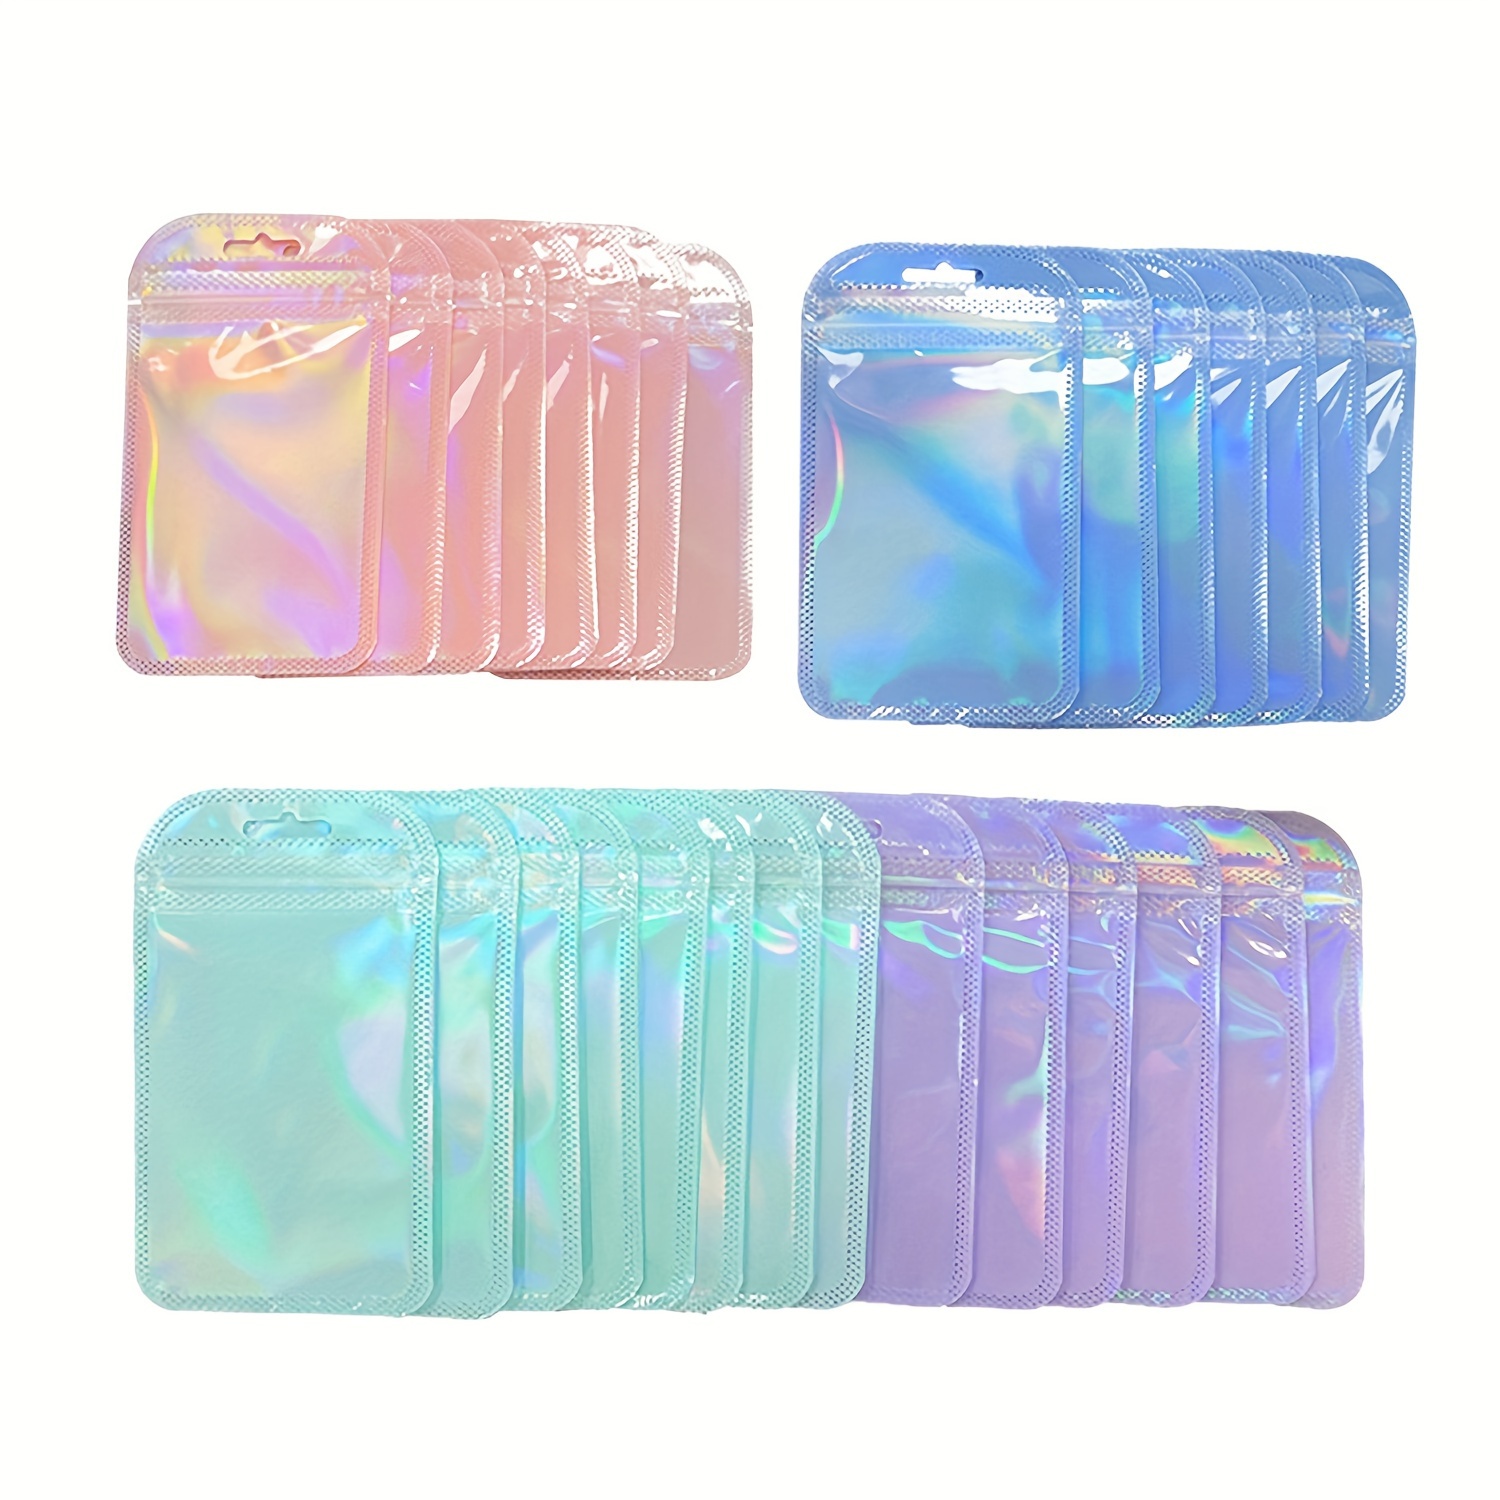 

100pcs Mixed Macaroon Color Laser Ziplock Bags, Resealable Jewelry Packaging Organizer Bags, Party Favors Sample Cosmetic Storage Bags Practical Convenient Supplies